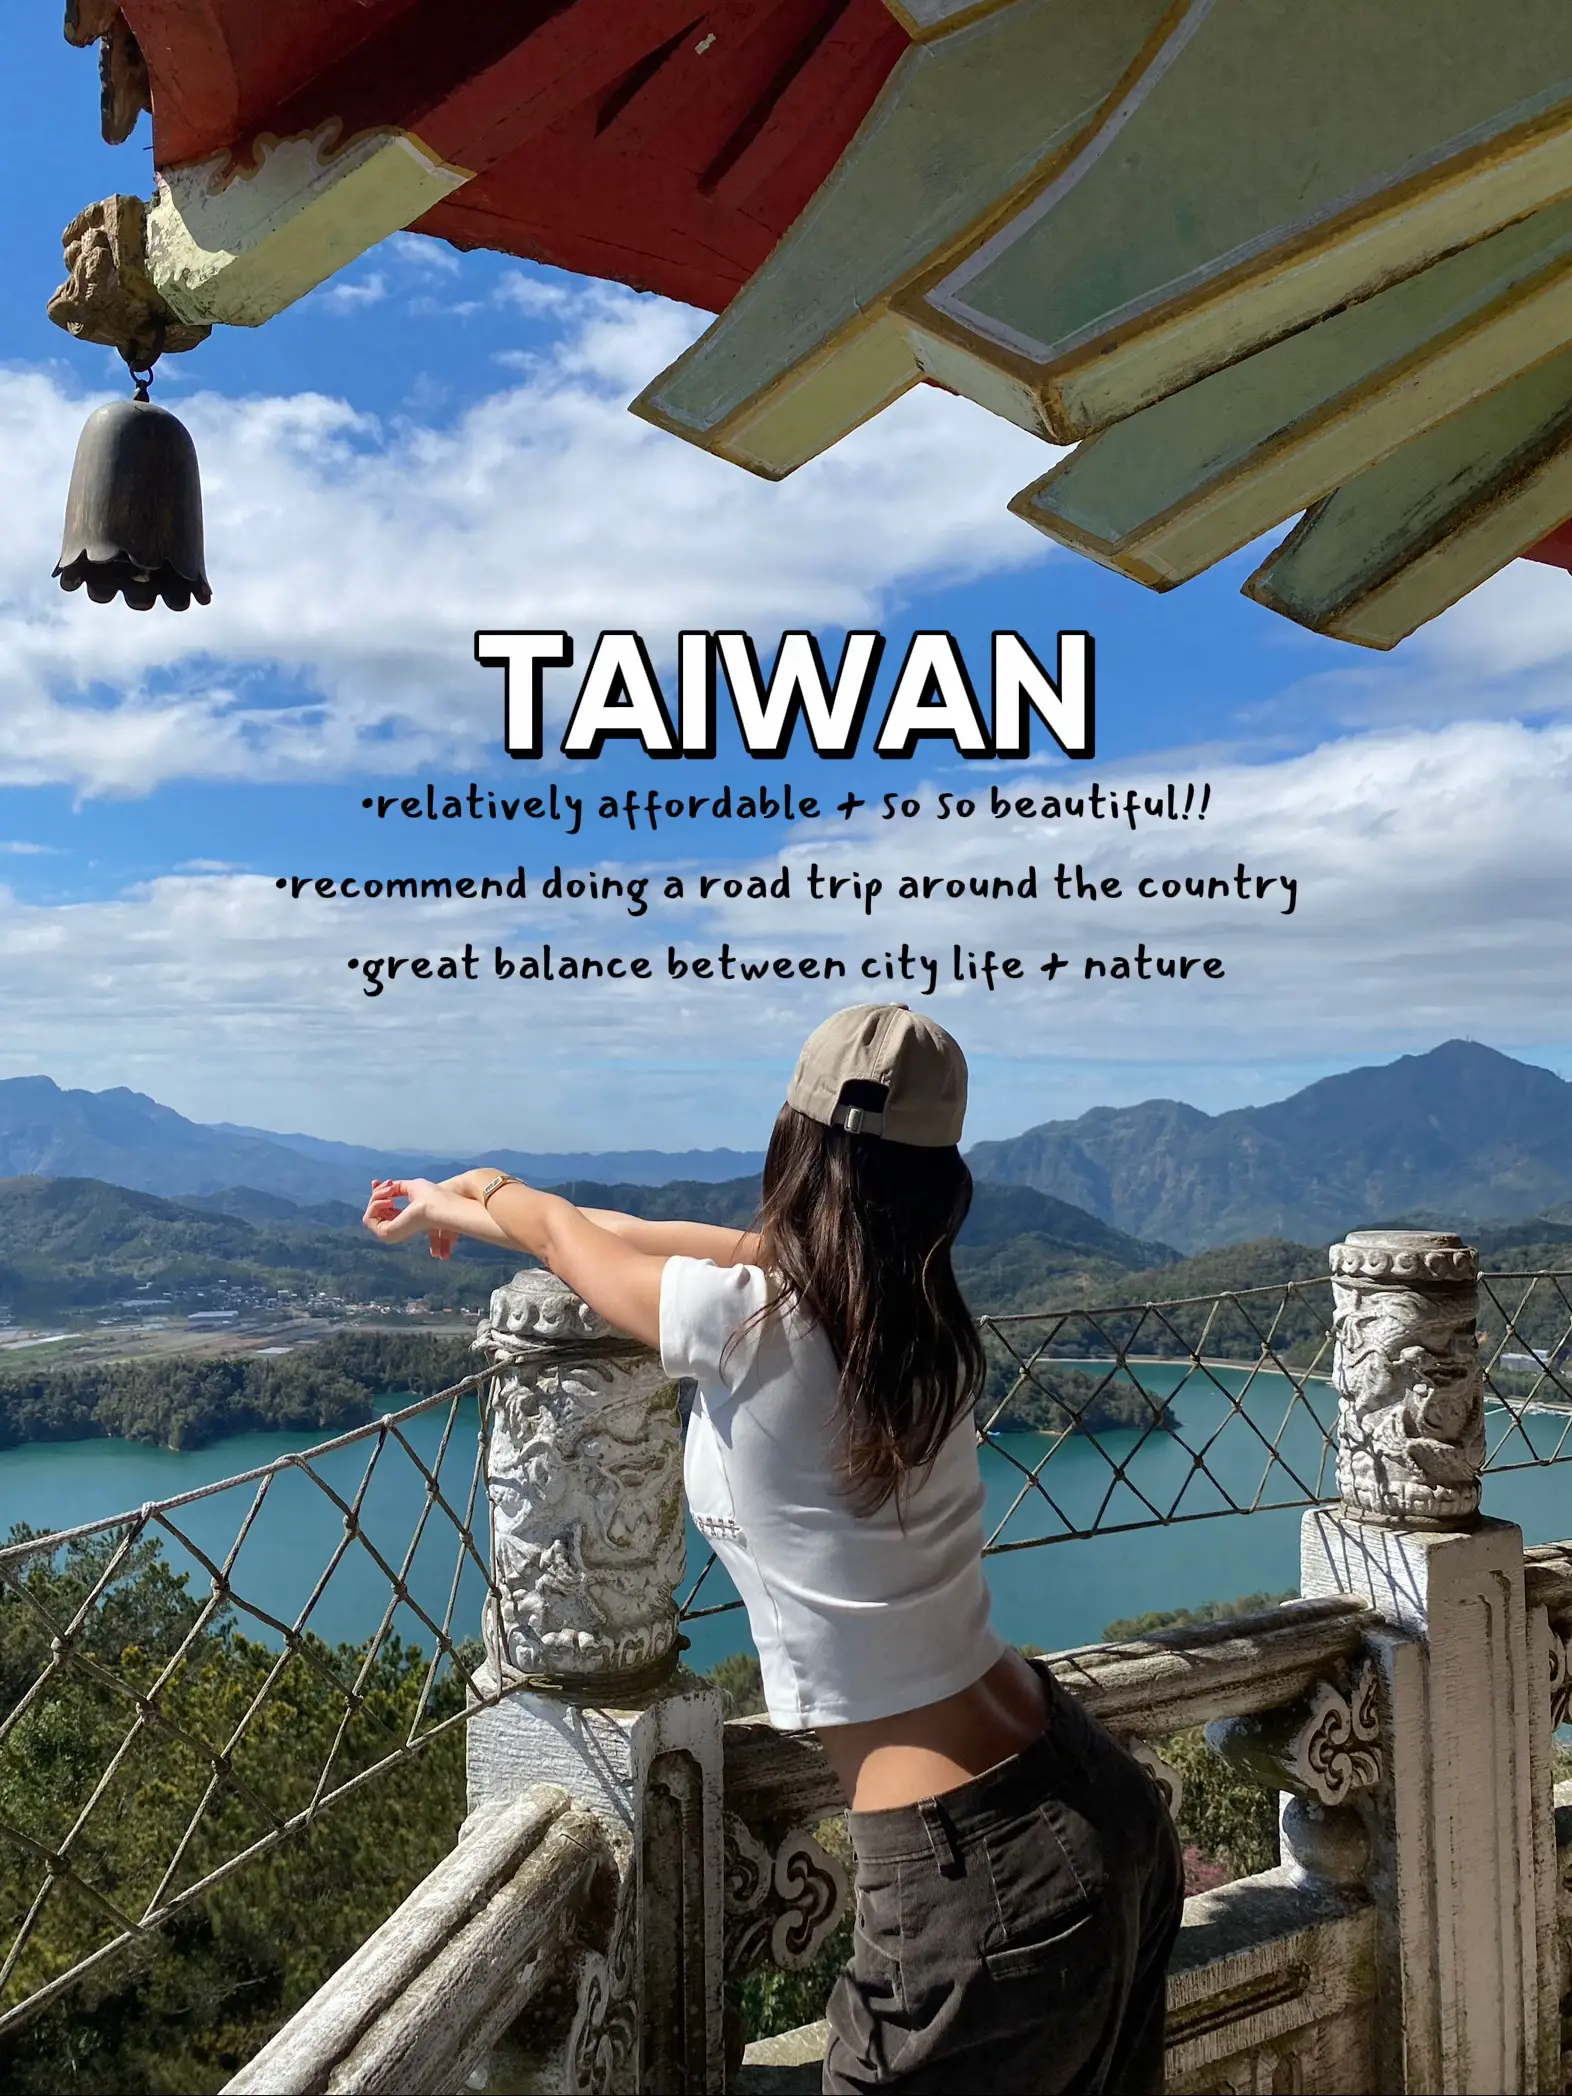  A woman is sitting on a fence overlooking a beautiful view of Taiwan.